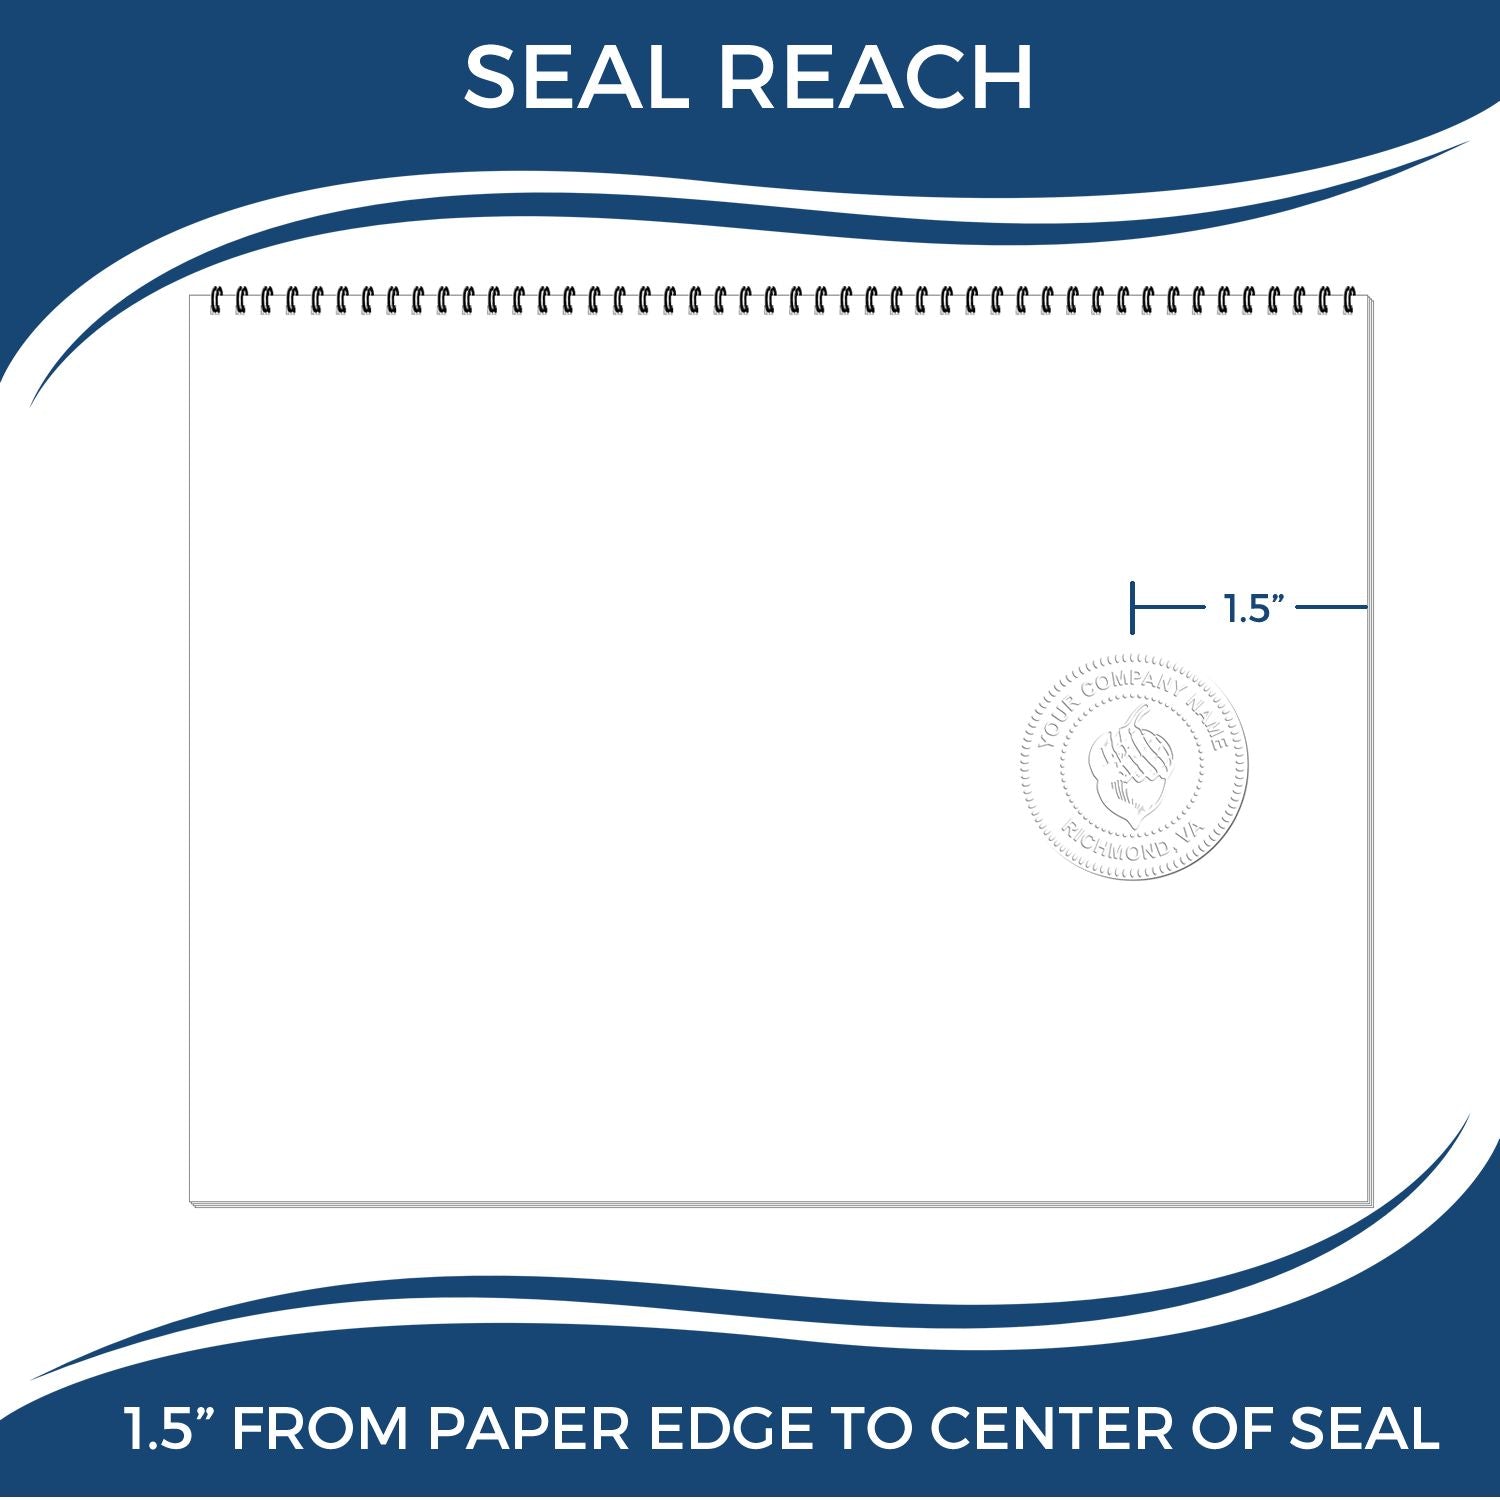 An infographic showing the seal reach which is represented by a ruler and a miniature seal image of the Gift South Dakota Landscape Architect Seal